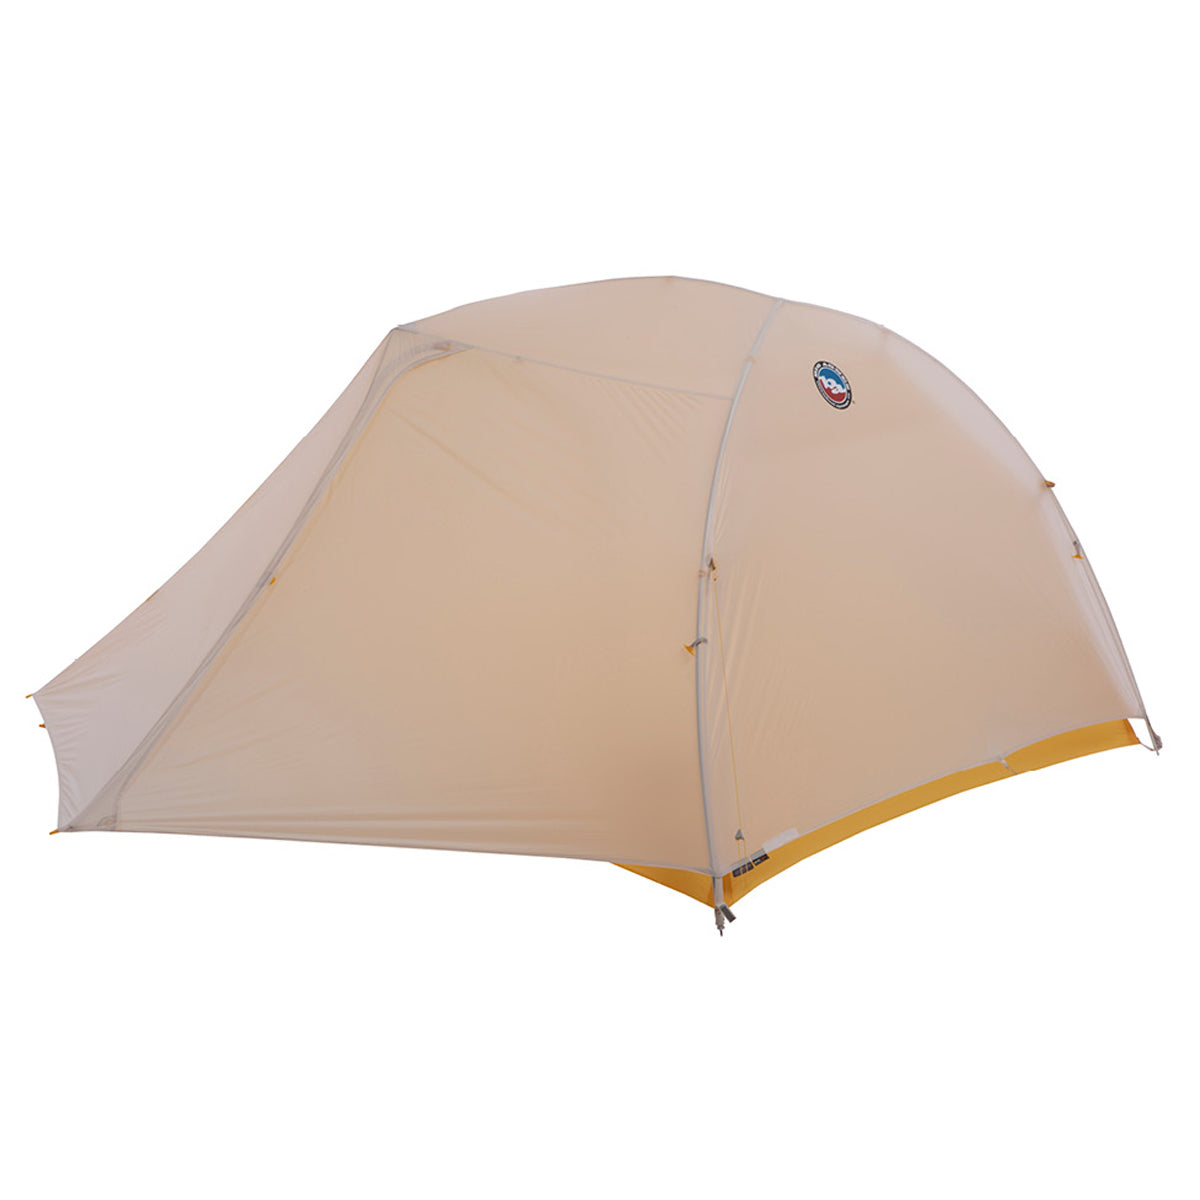 Big Agnes Tiger Wall UL 3 Person Solution Dye Tent in  by GOHUNT | Big Agnes - GOHUNT Shop